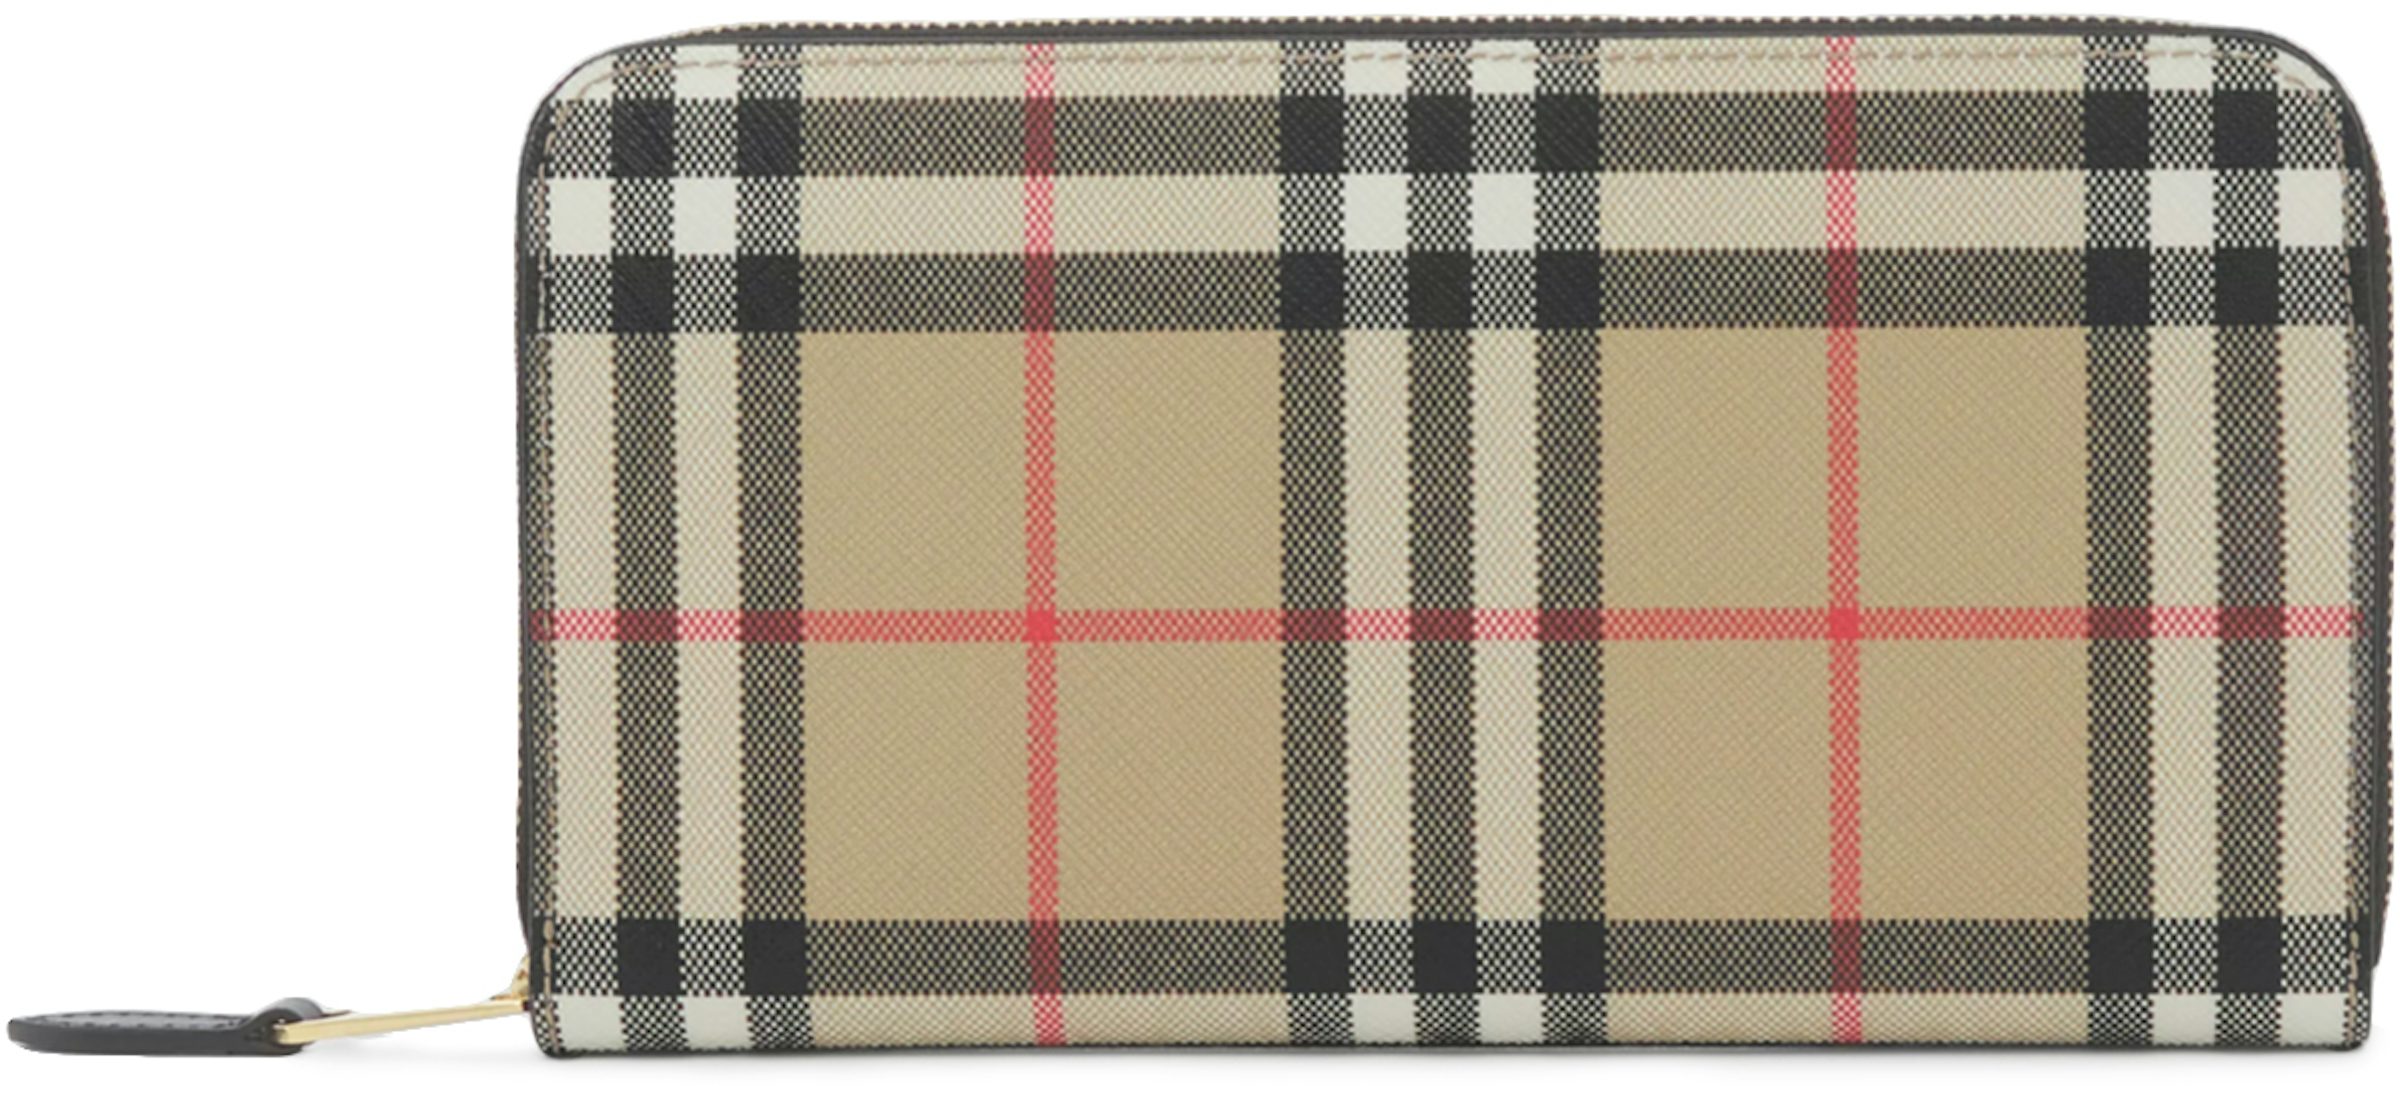 BURBERRY Vintage Check Leather Wallet Beige